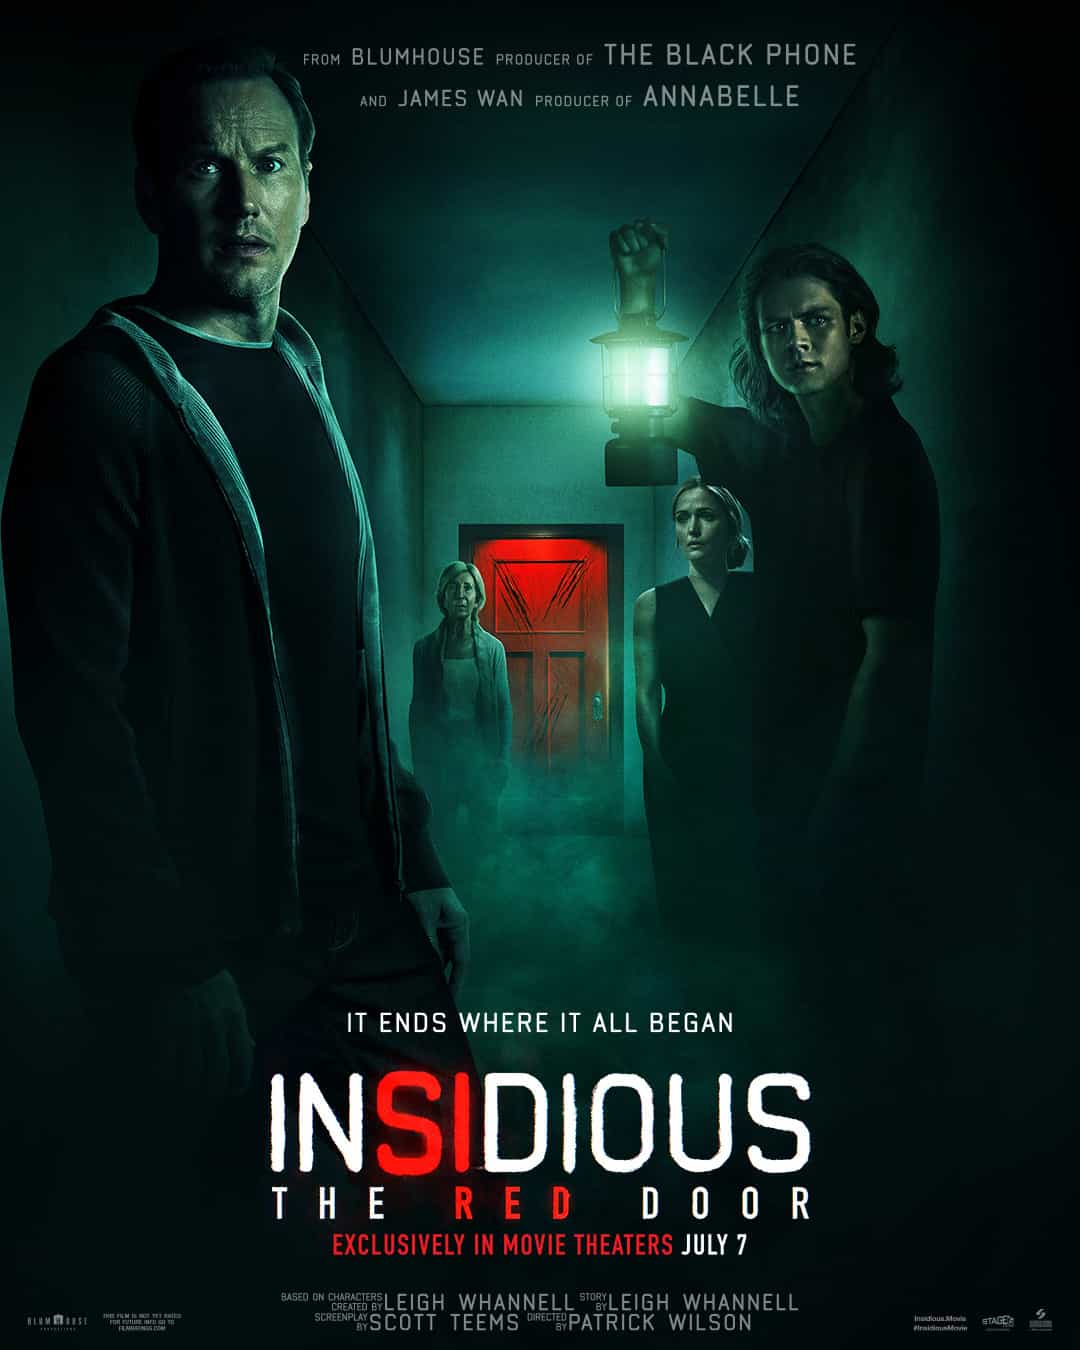 New poster has been released for Insidious: The Red Door which stars Ty Simpkins and Patrick Wilson - movie UK release date 7th July 2023 #insidiousthereddoor